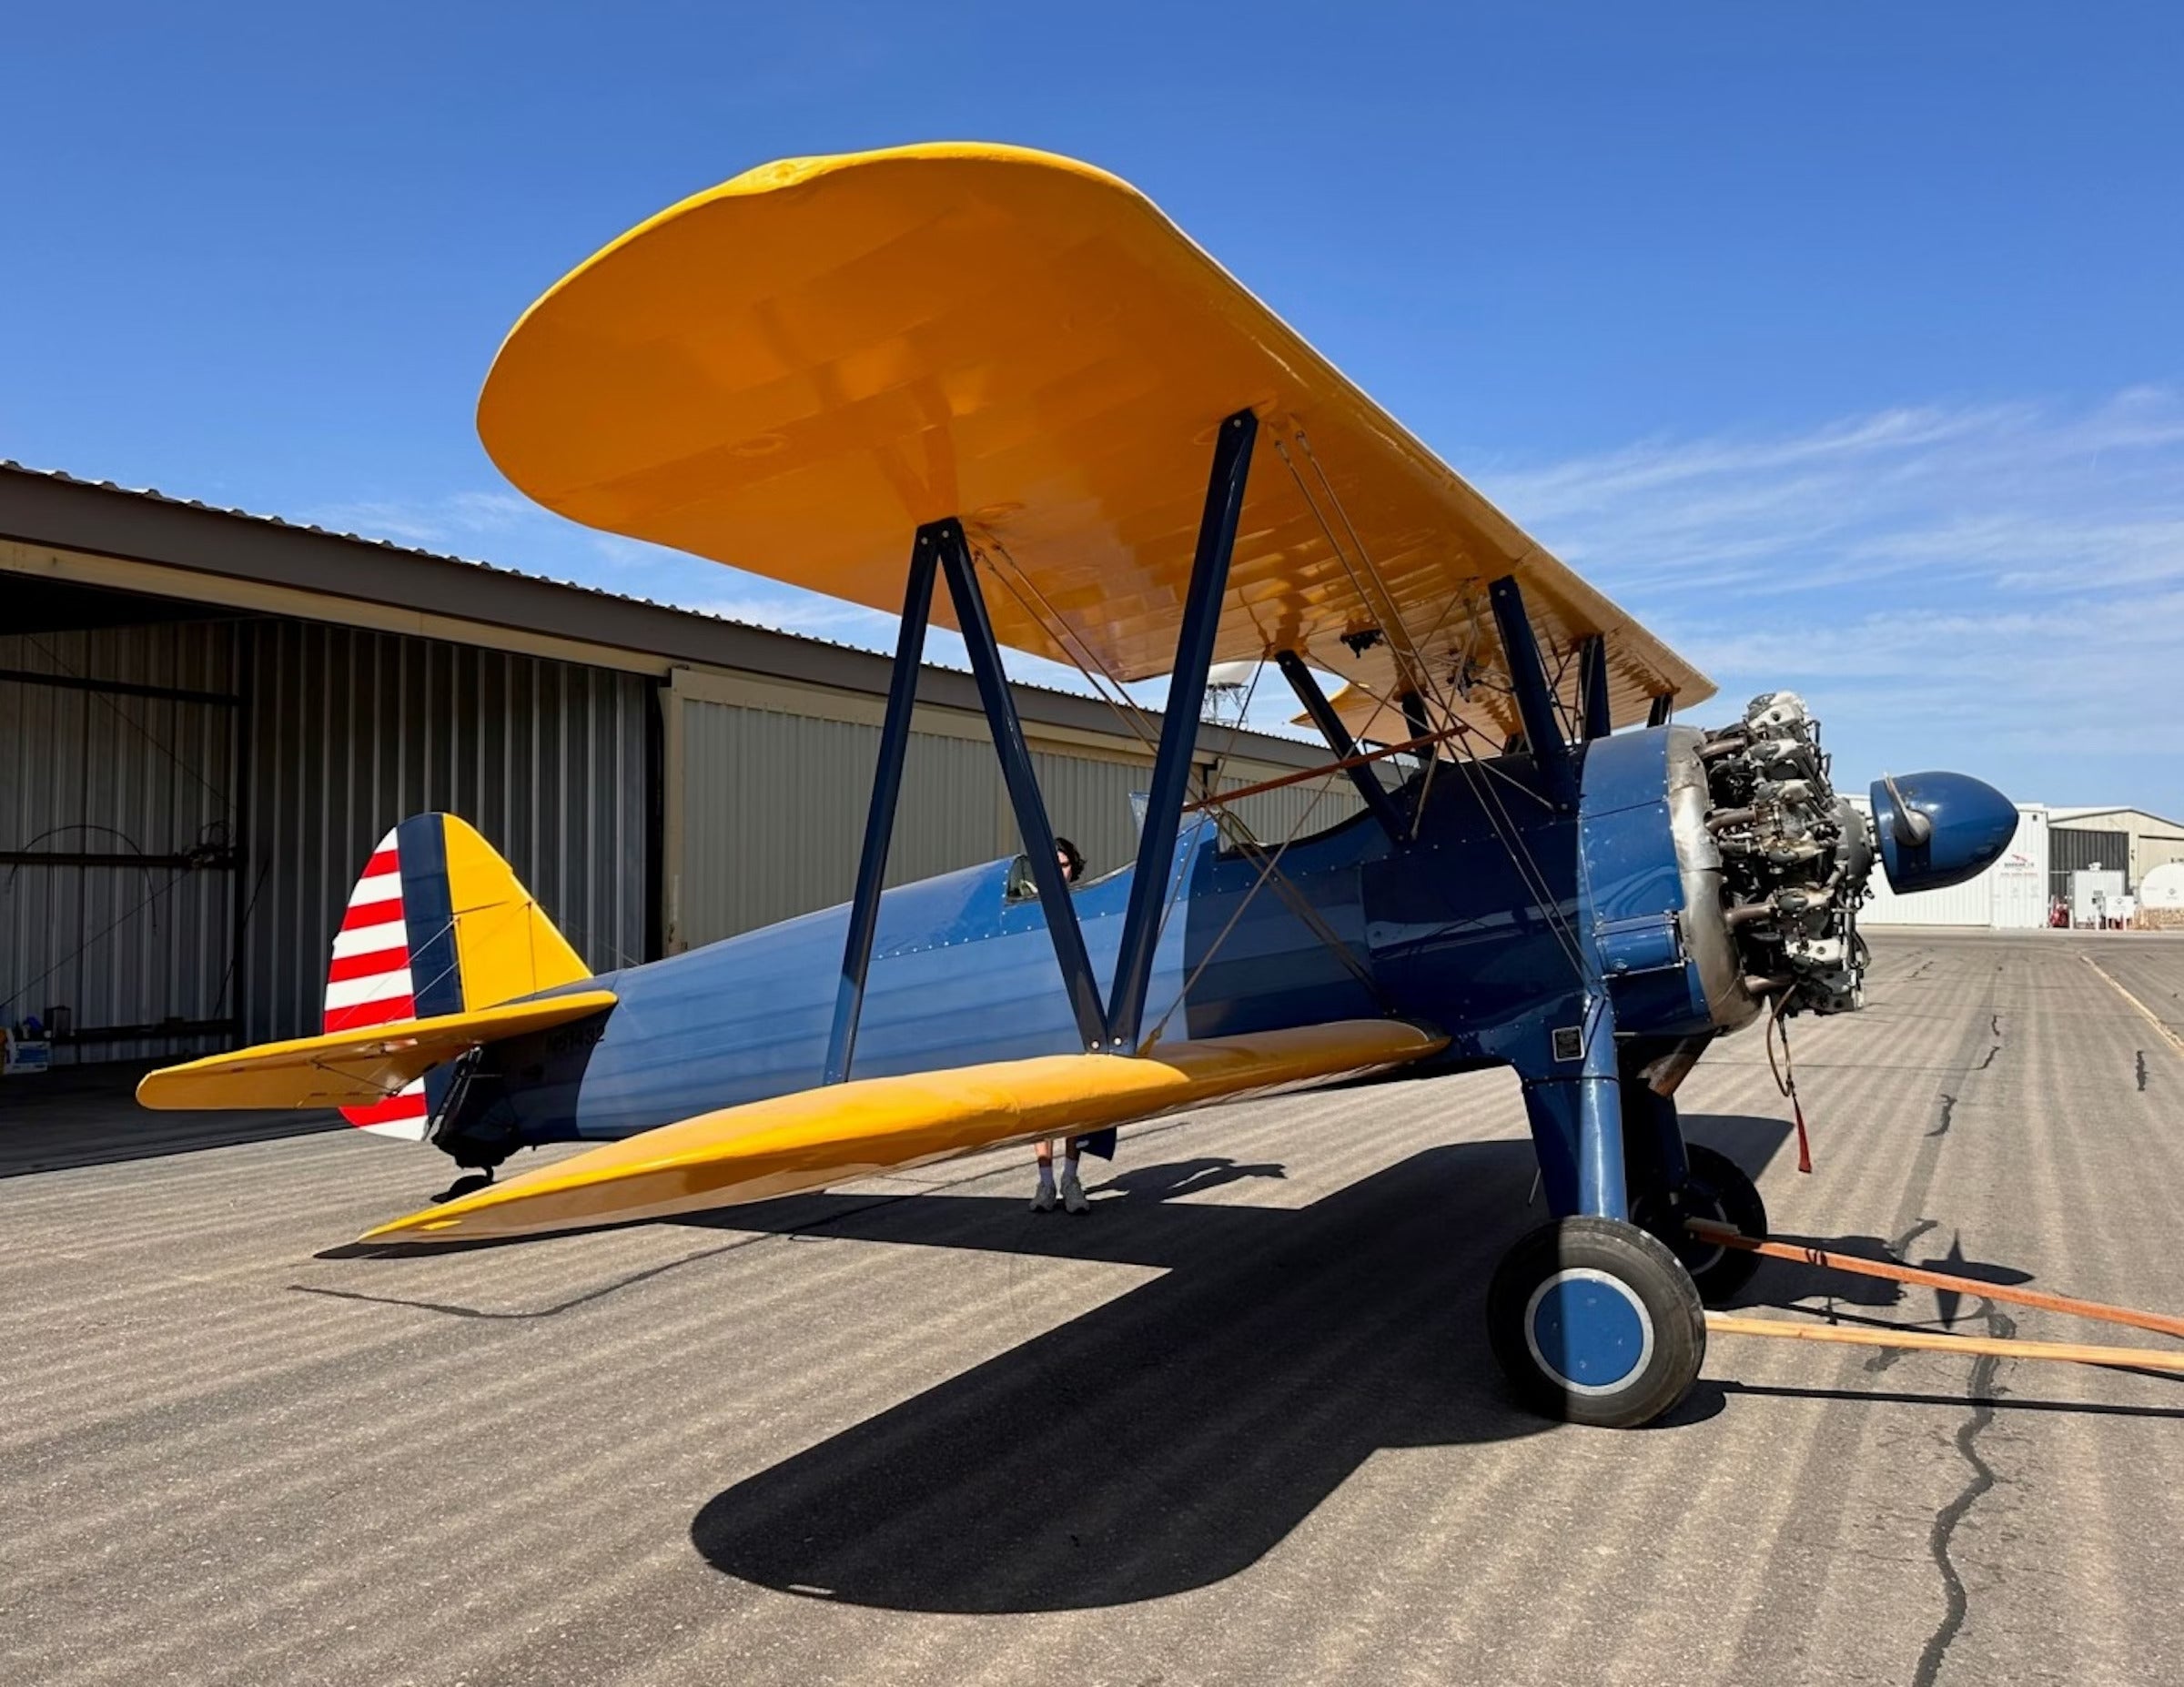 This 1941 Boeing/Stearman PT-17 Is a Golden Age ‘AircraftForSale’ Top Pick